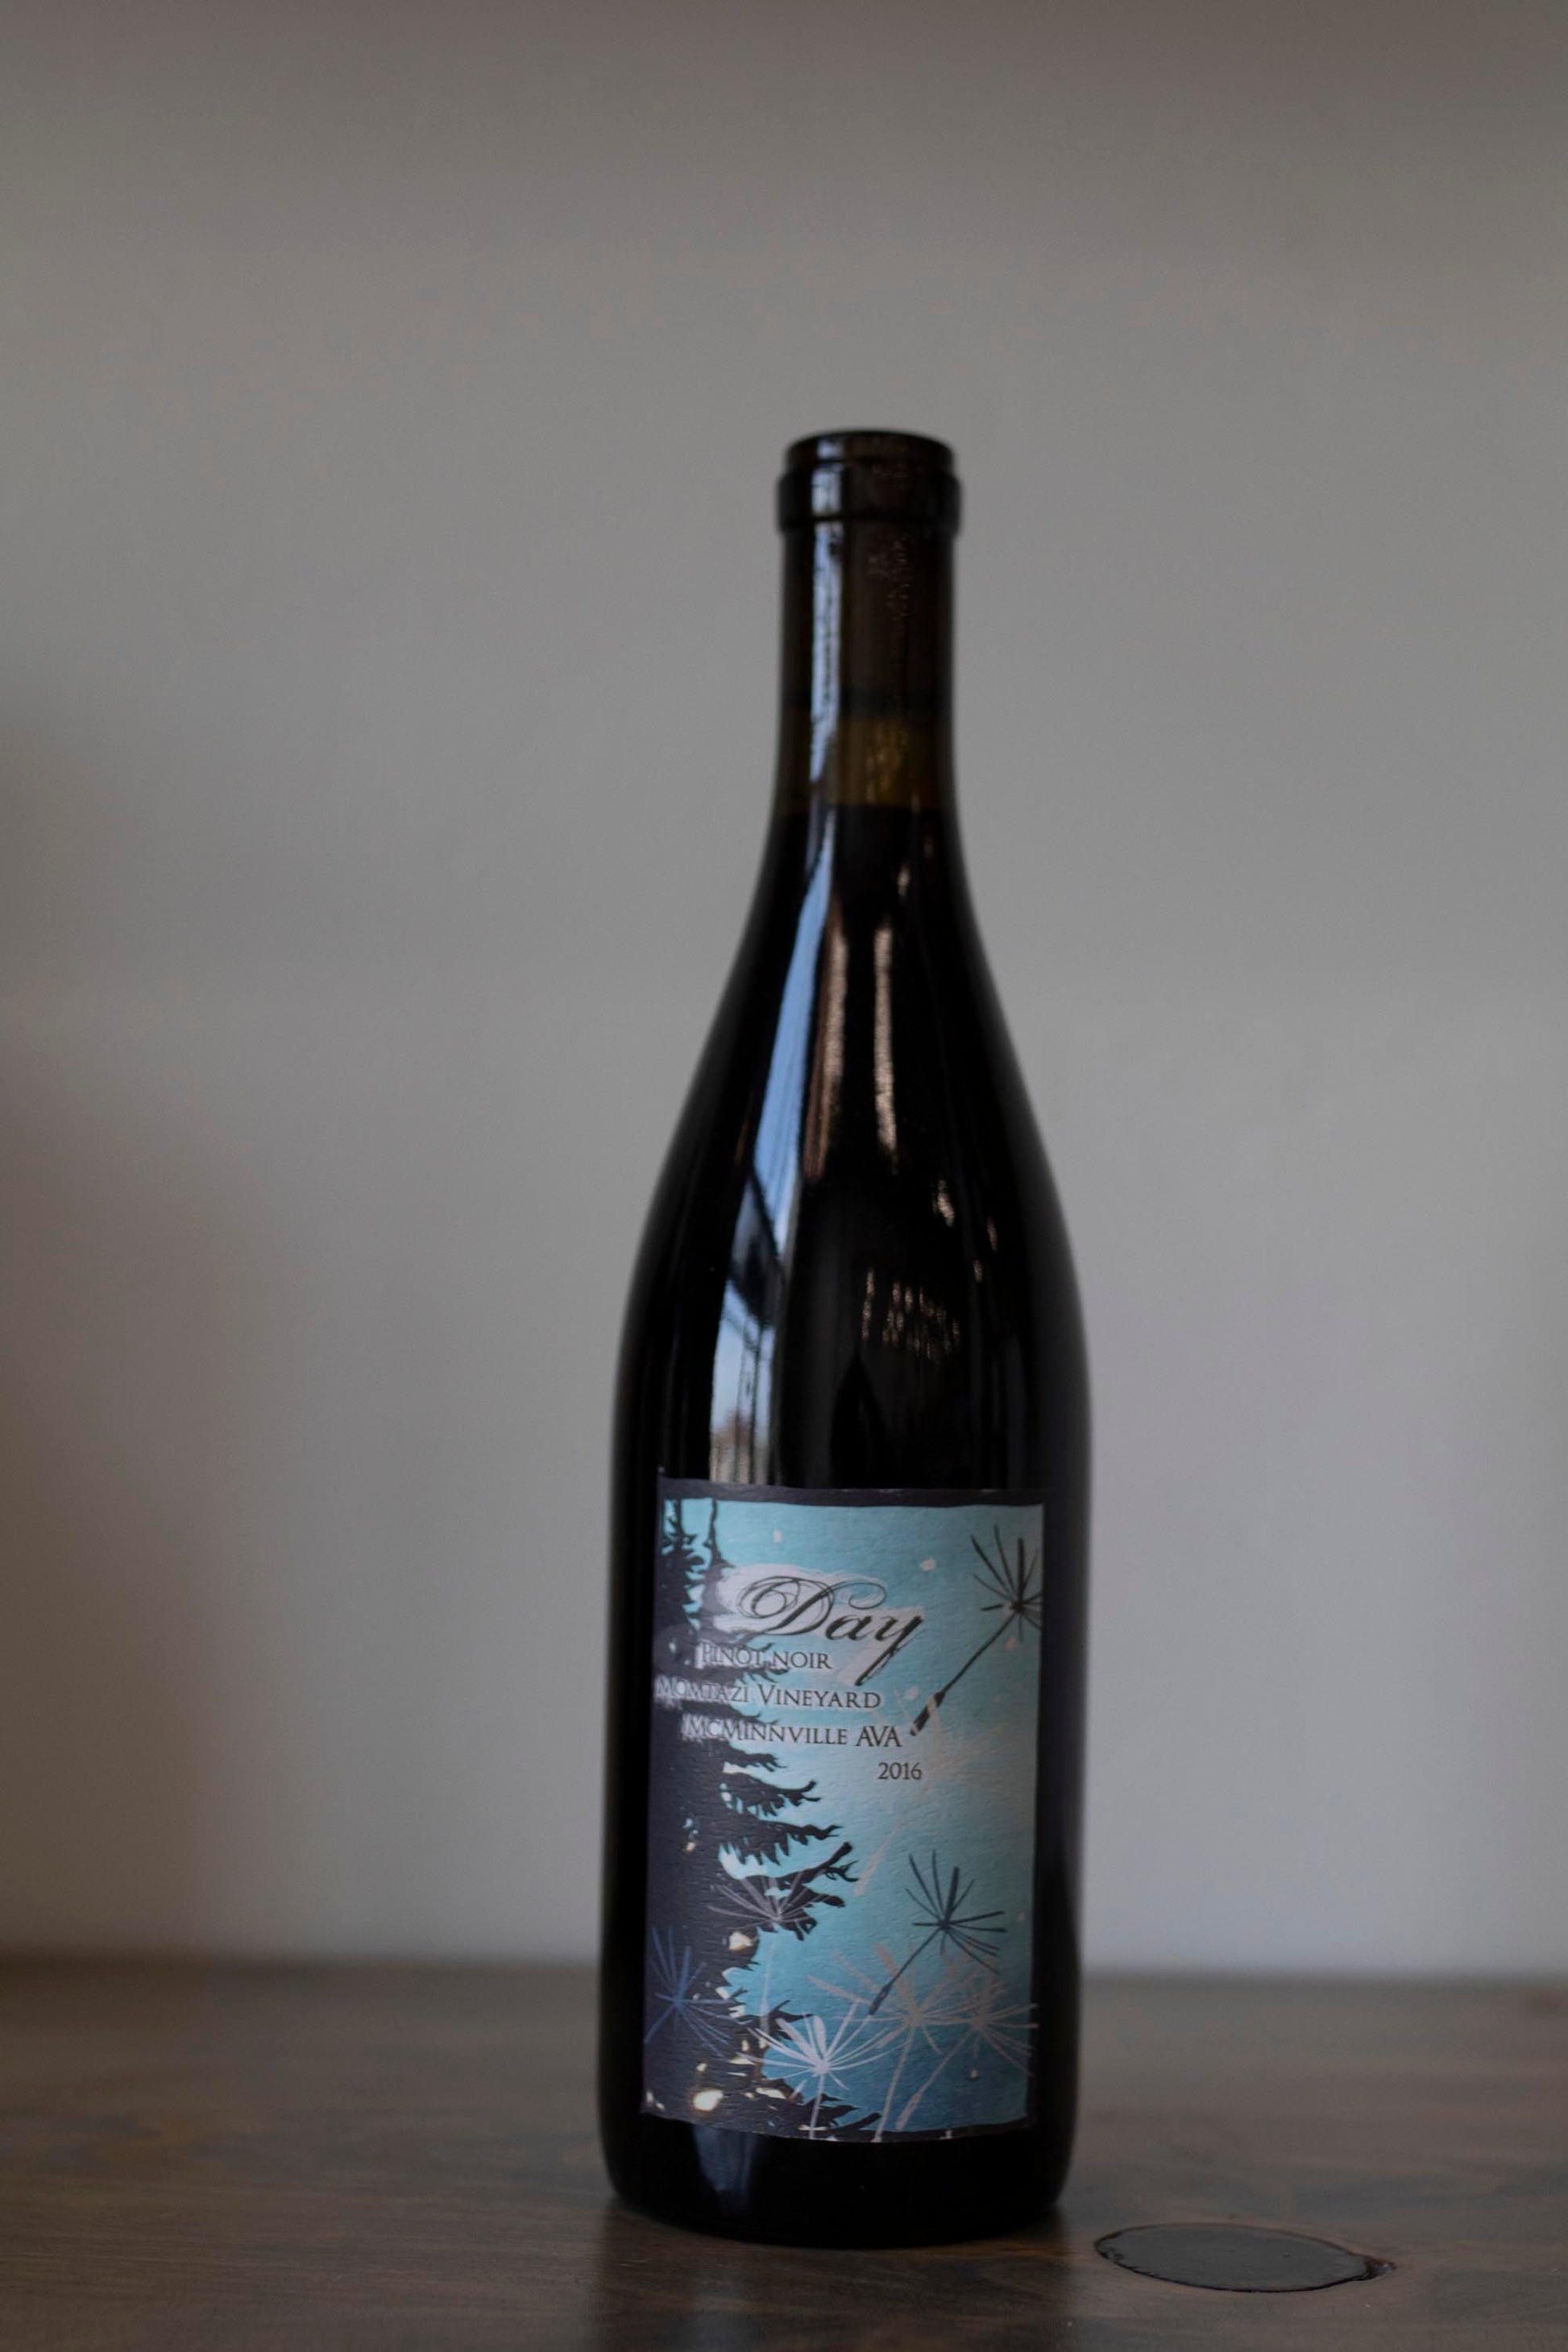 Bottle of Day Pinot Noir Johan found at Vine & Board in 3809 NW 166th St Suite 1, Edmond, OK 73012